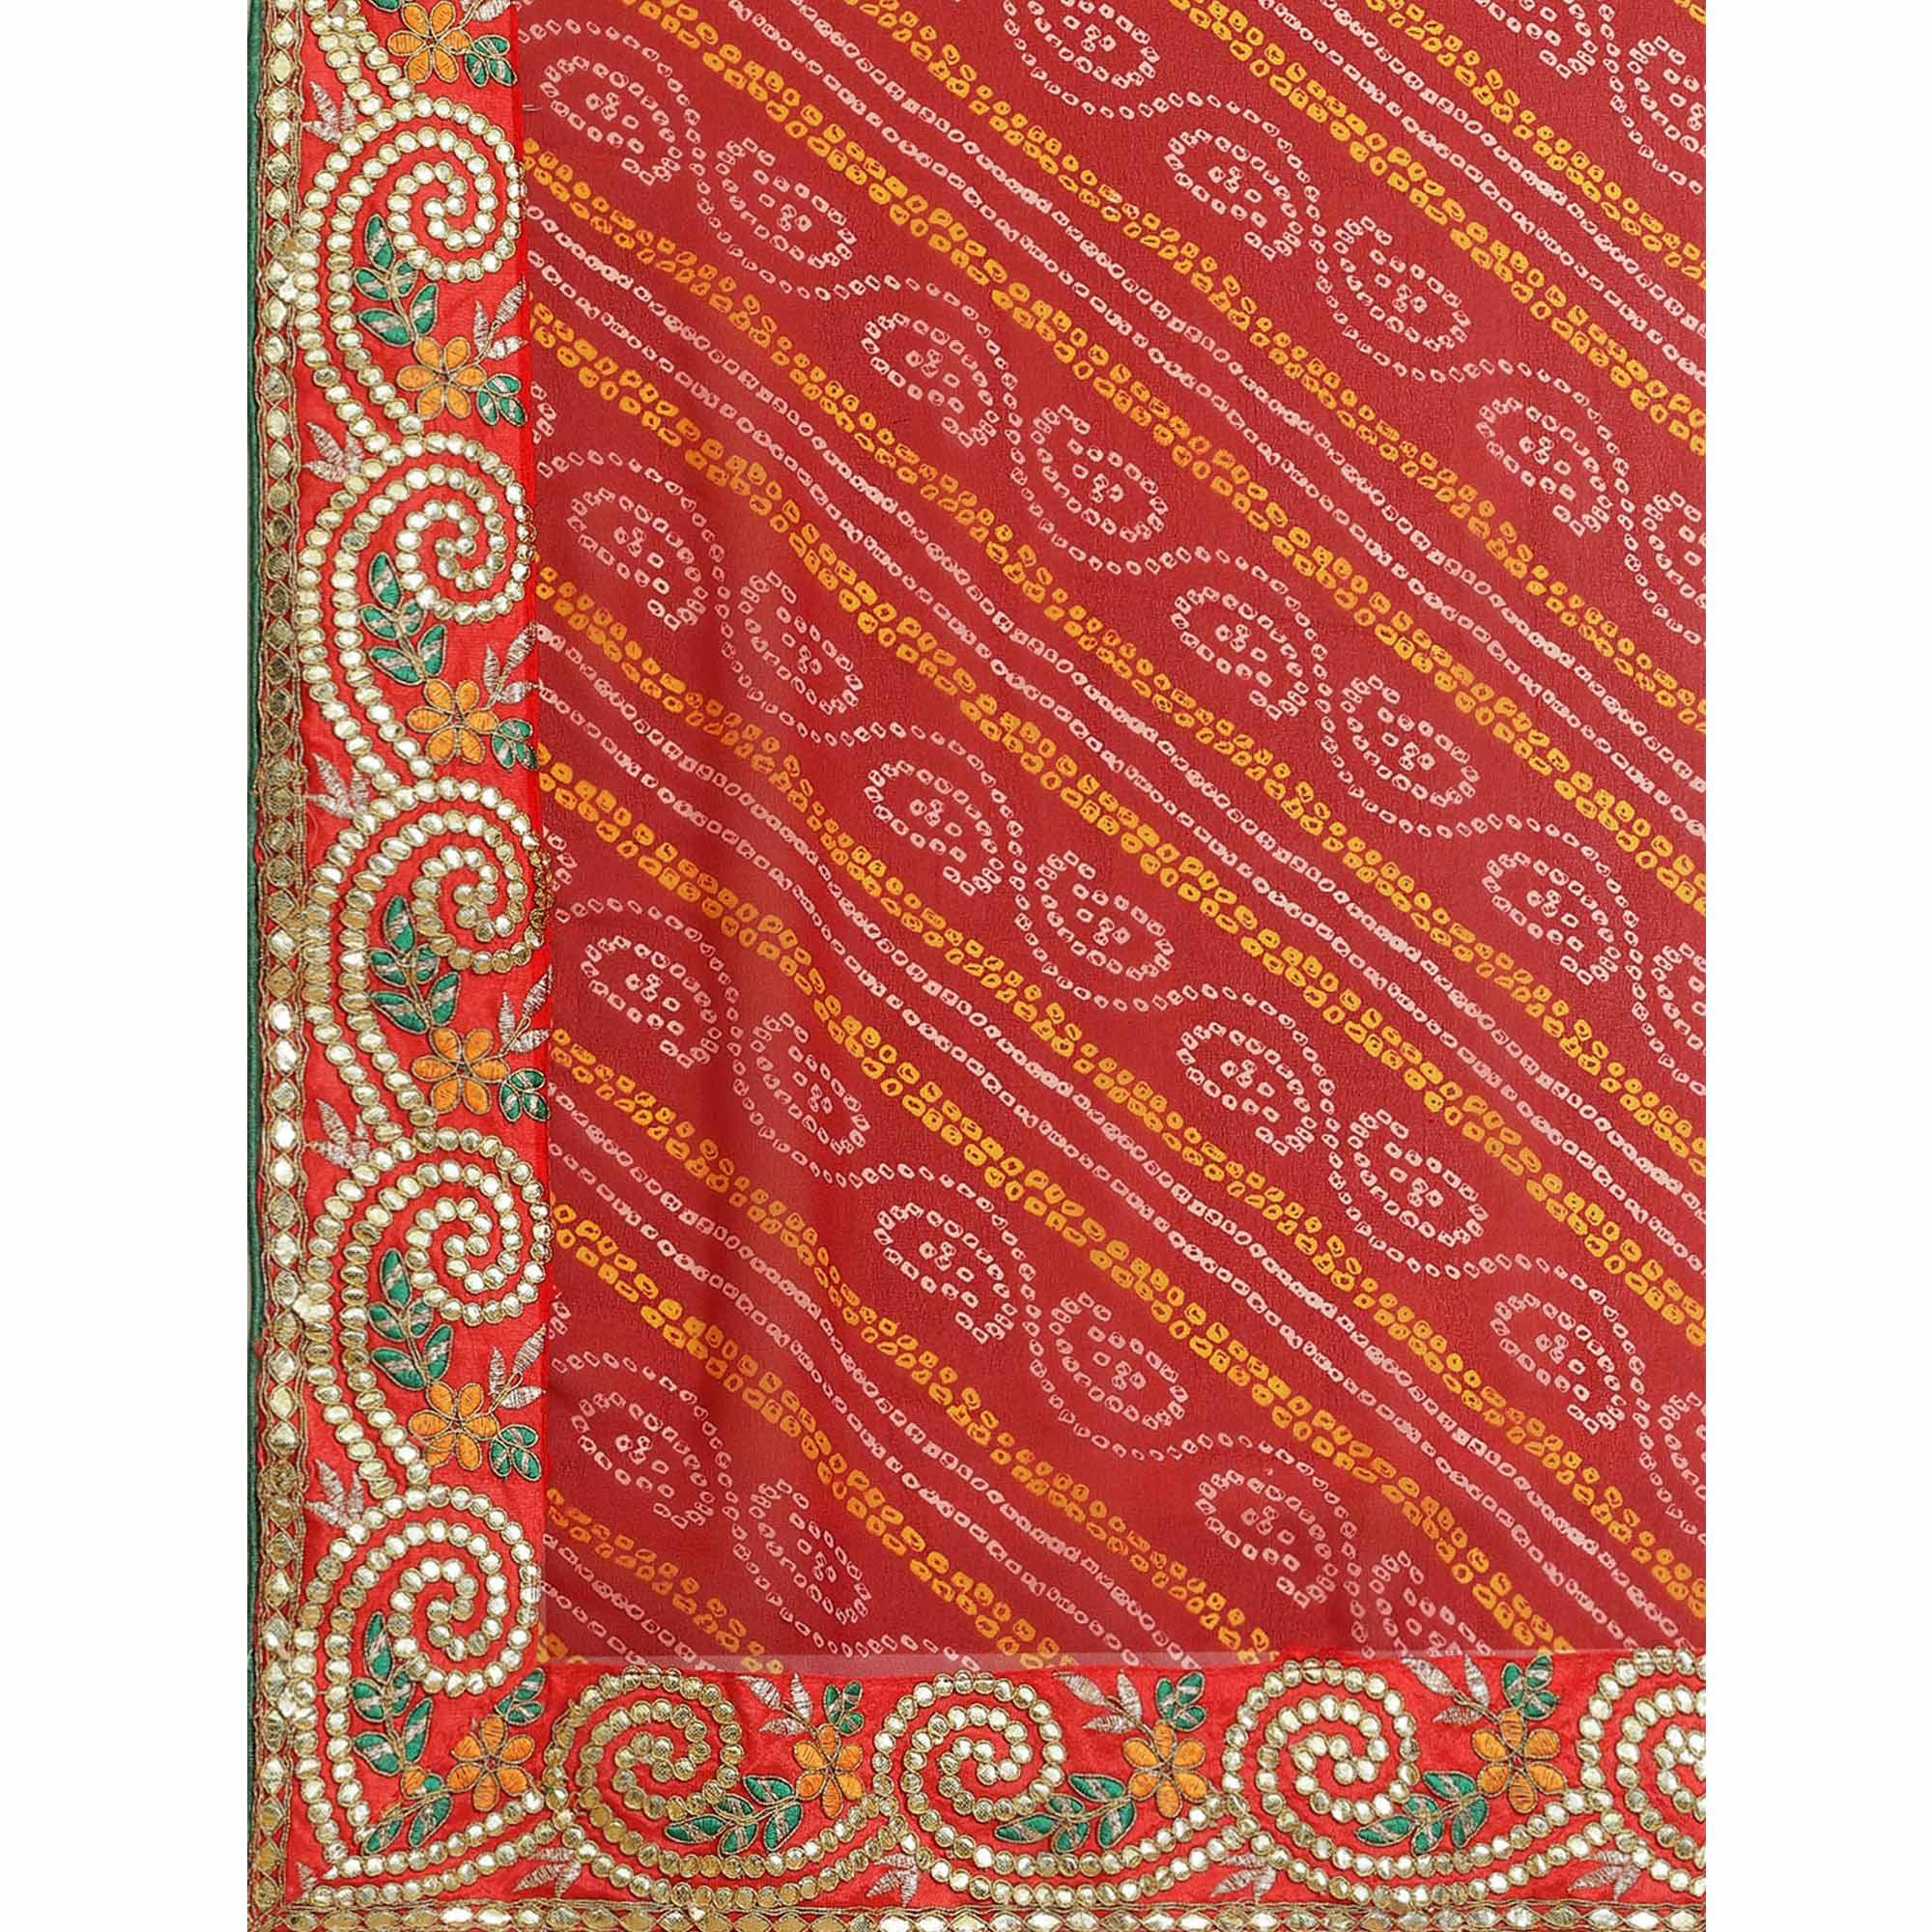 Trendy Red Coloured Partywear Printed Georgette Saree - Peachmode